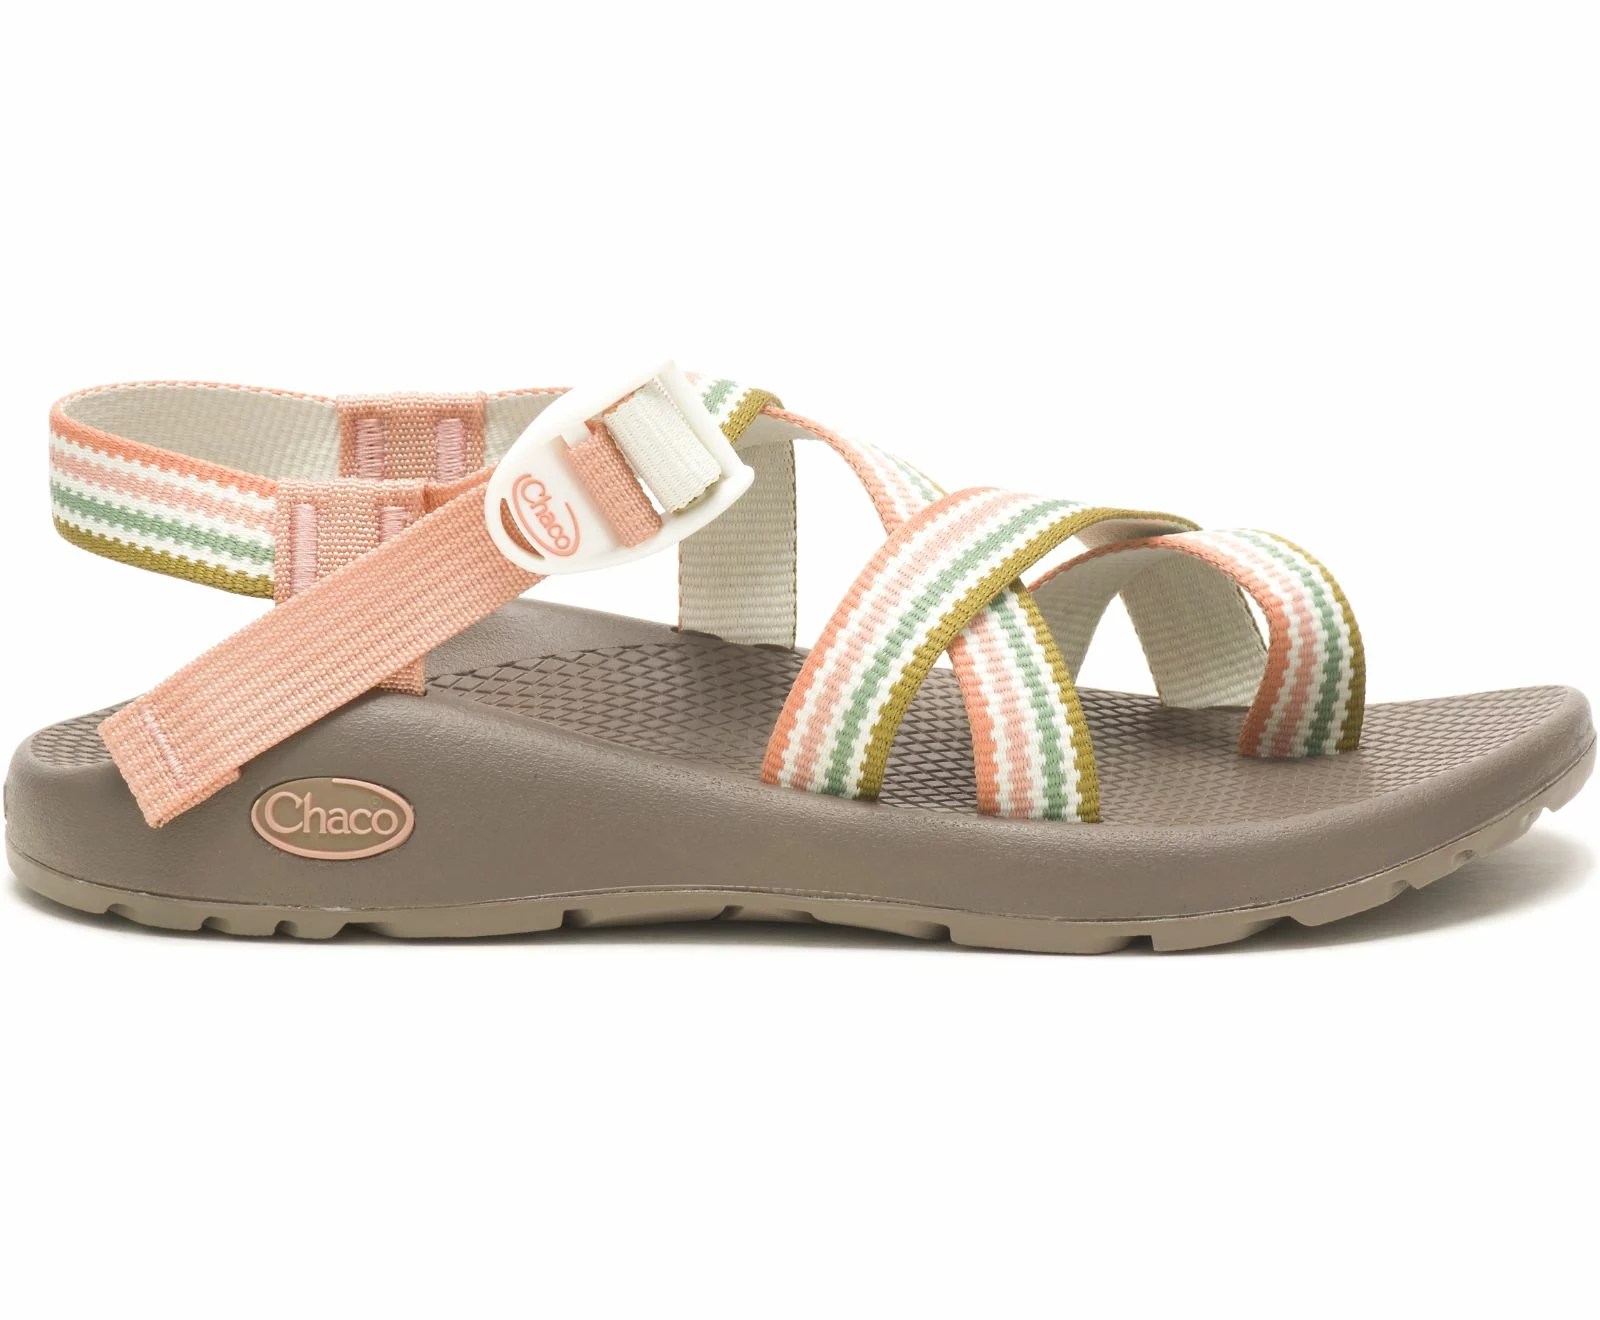 Chaco Z/2 Classic Sandal, best sandals with arch support